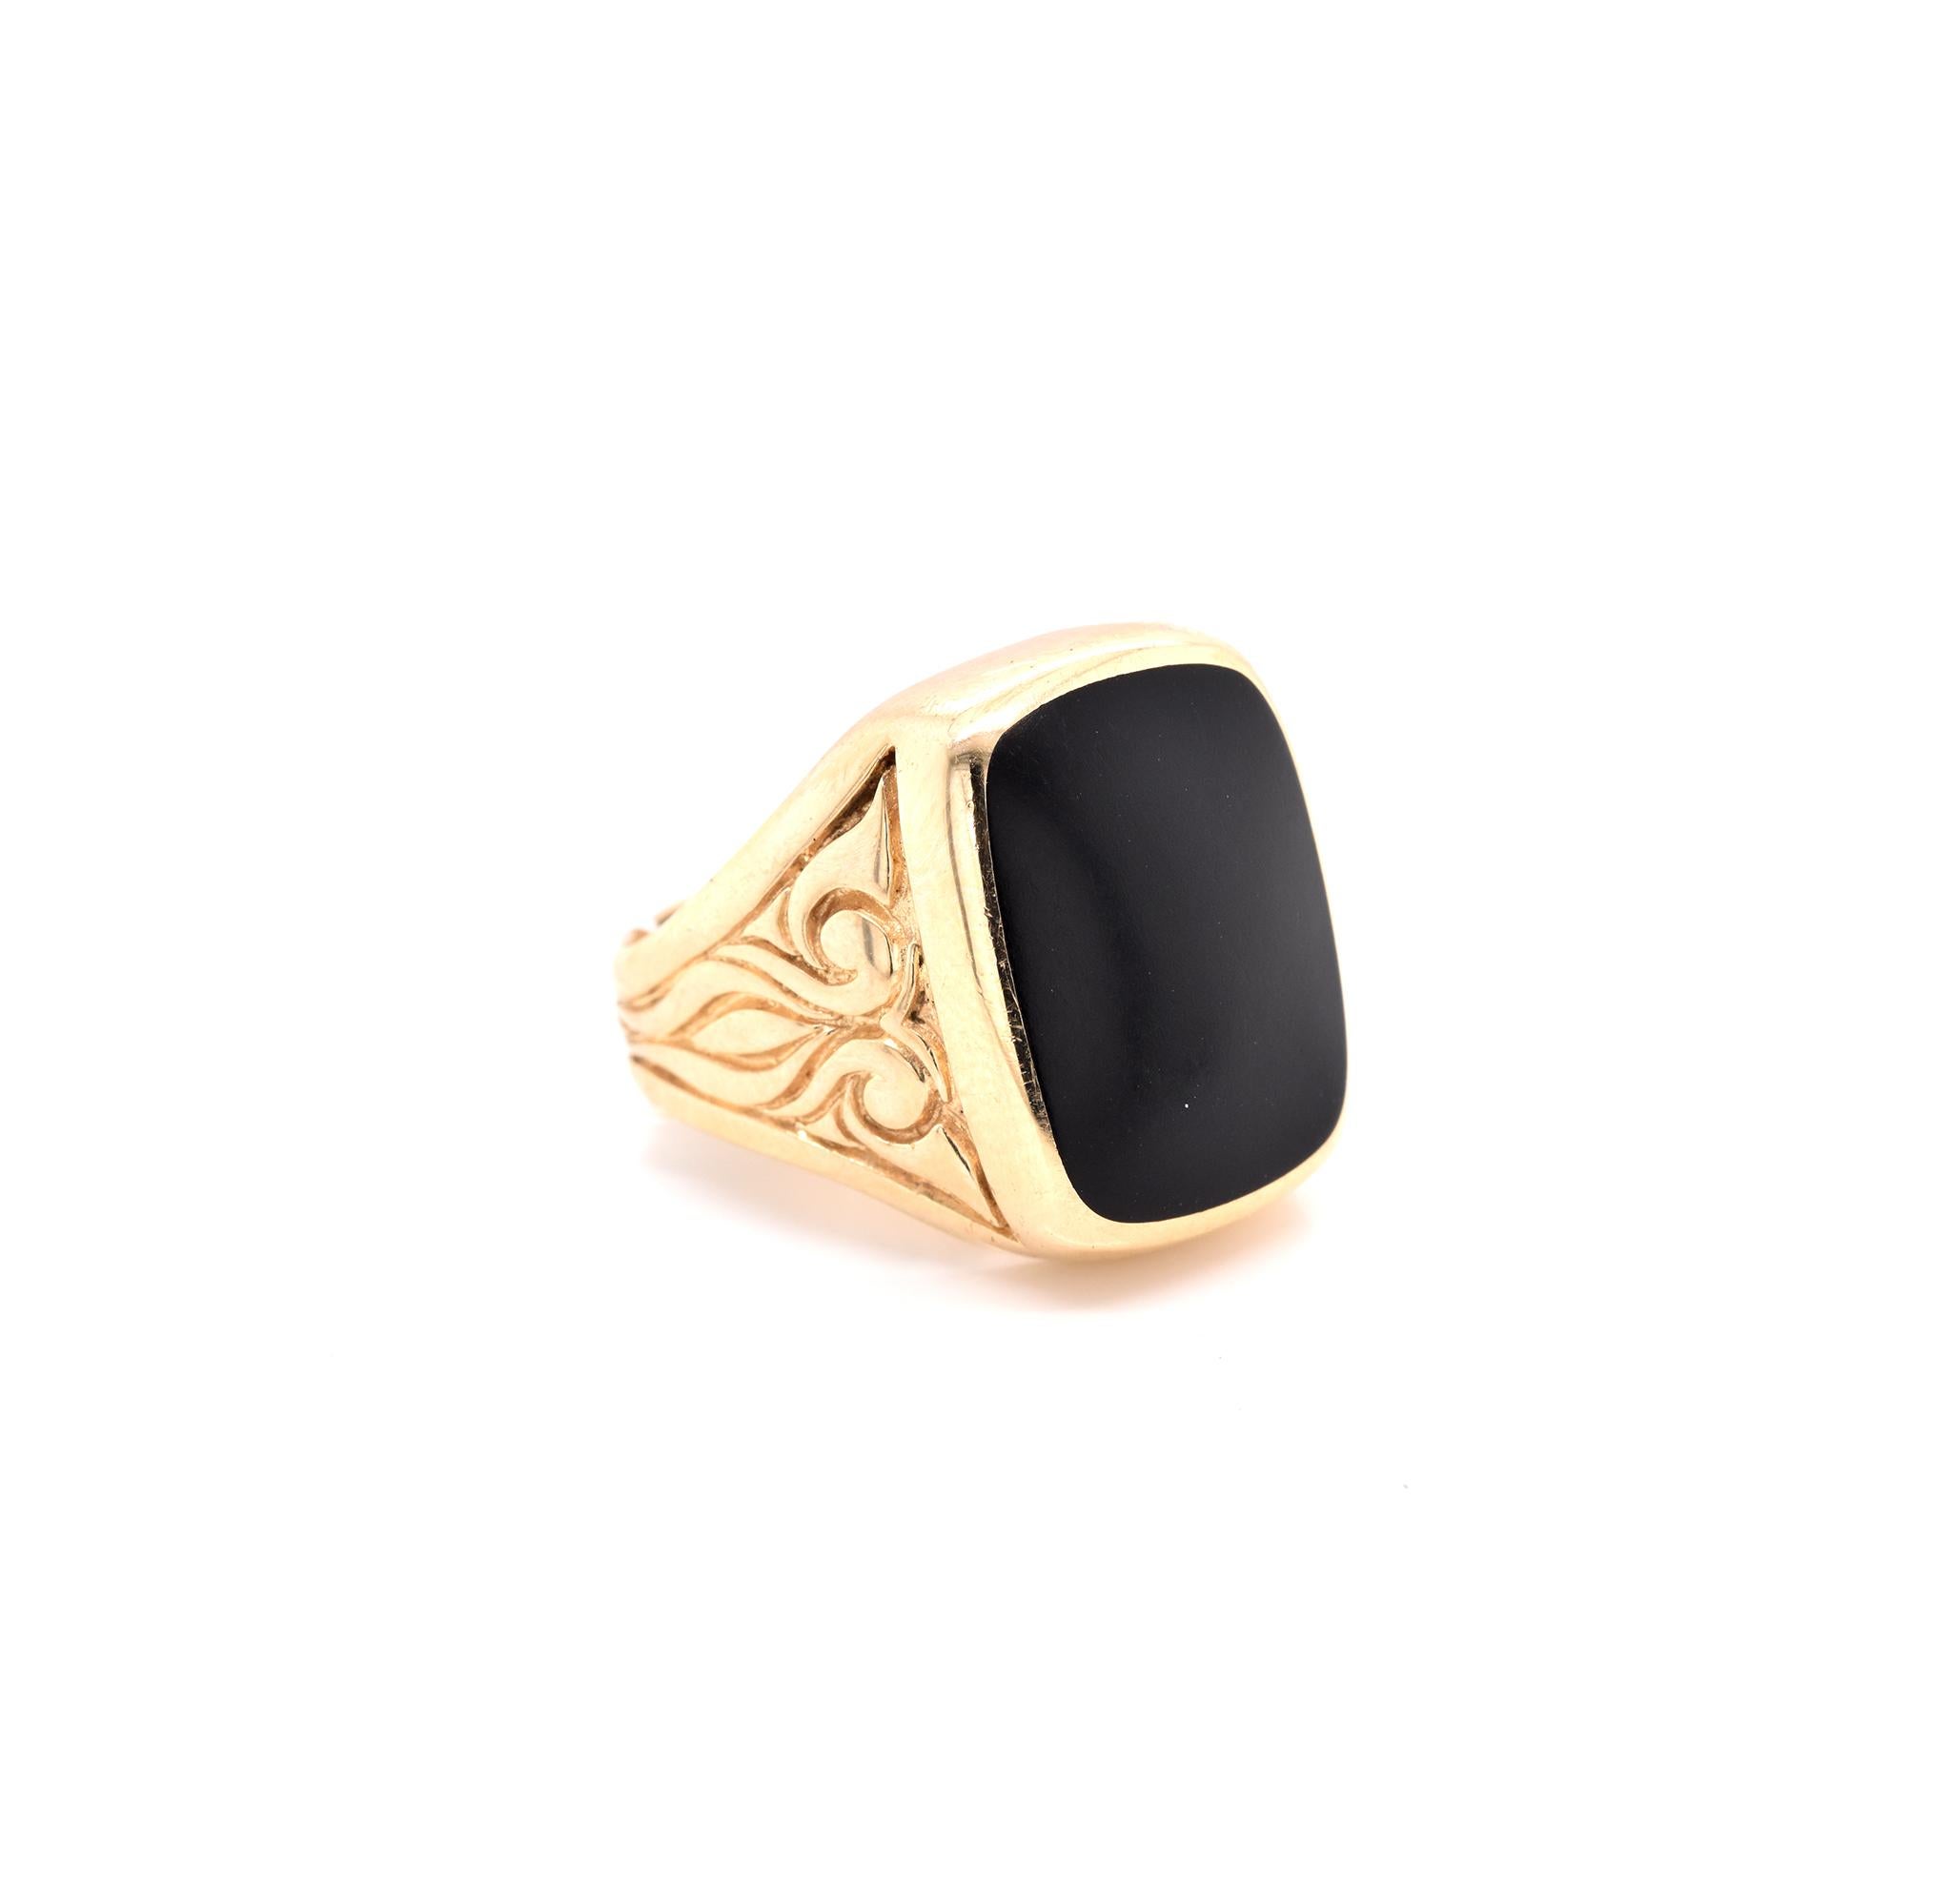 Designer: custom design
Material: 14k yellow gold 
Ring Size: 10.25 (please allow two additional shipping days for sizing requests)
Dimensions: ring top measures 20.7mm wide
Weight: 13.2 grams
